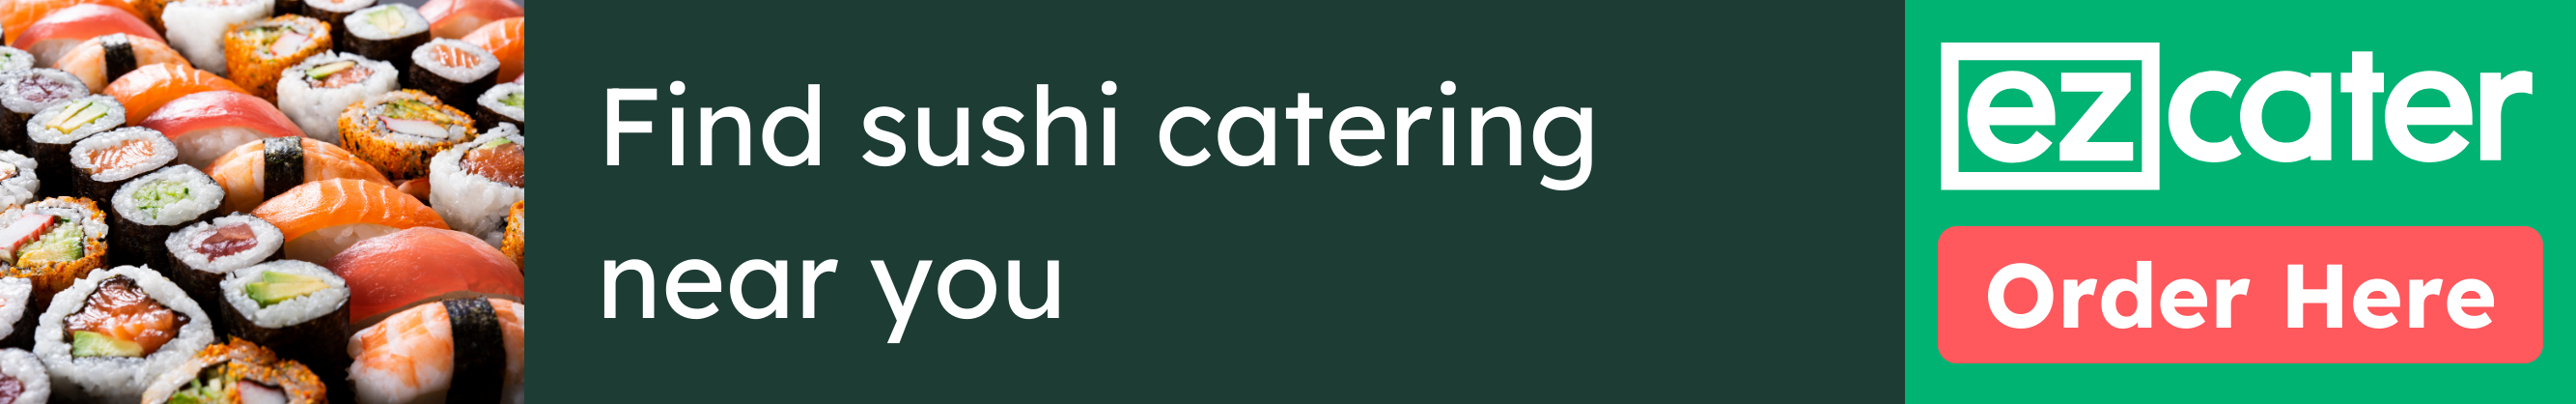 Find sushi catering near you. Order here. 